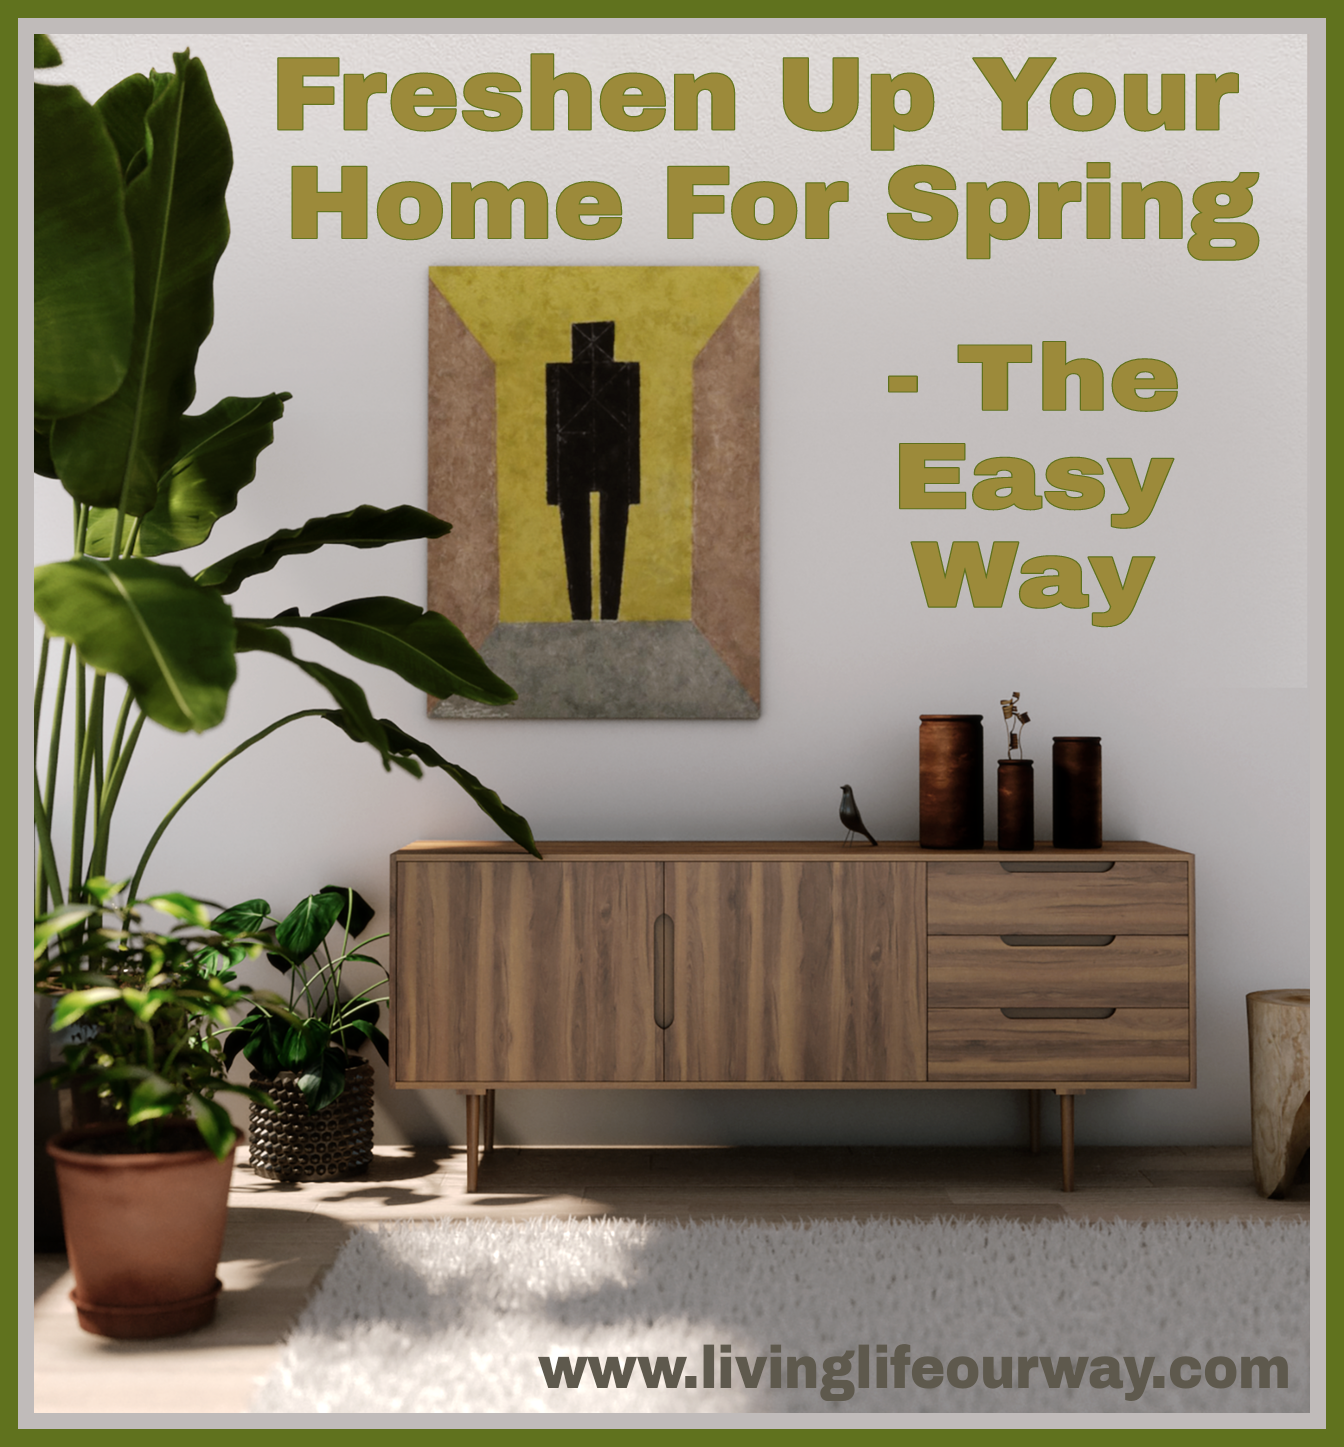 Freshen Up Your Home For Spring- The Easy Way title with picture of a tidy well designed living room